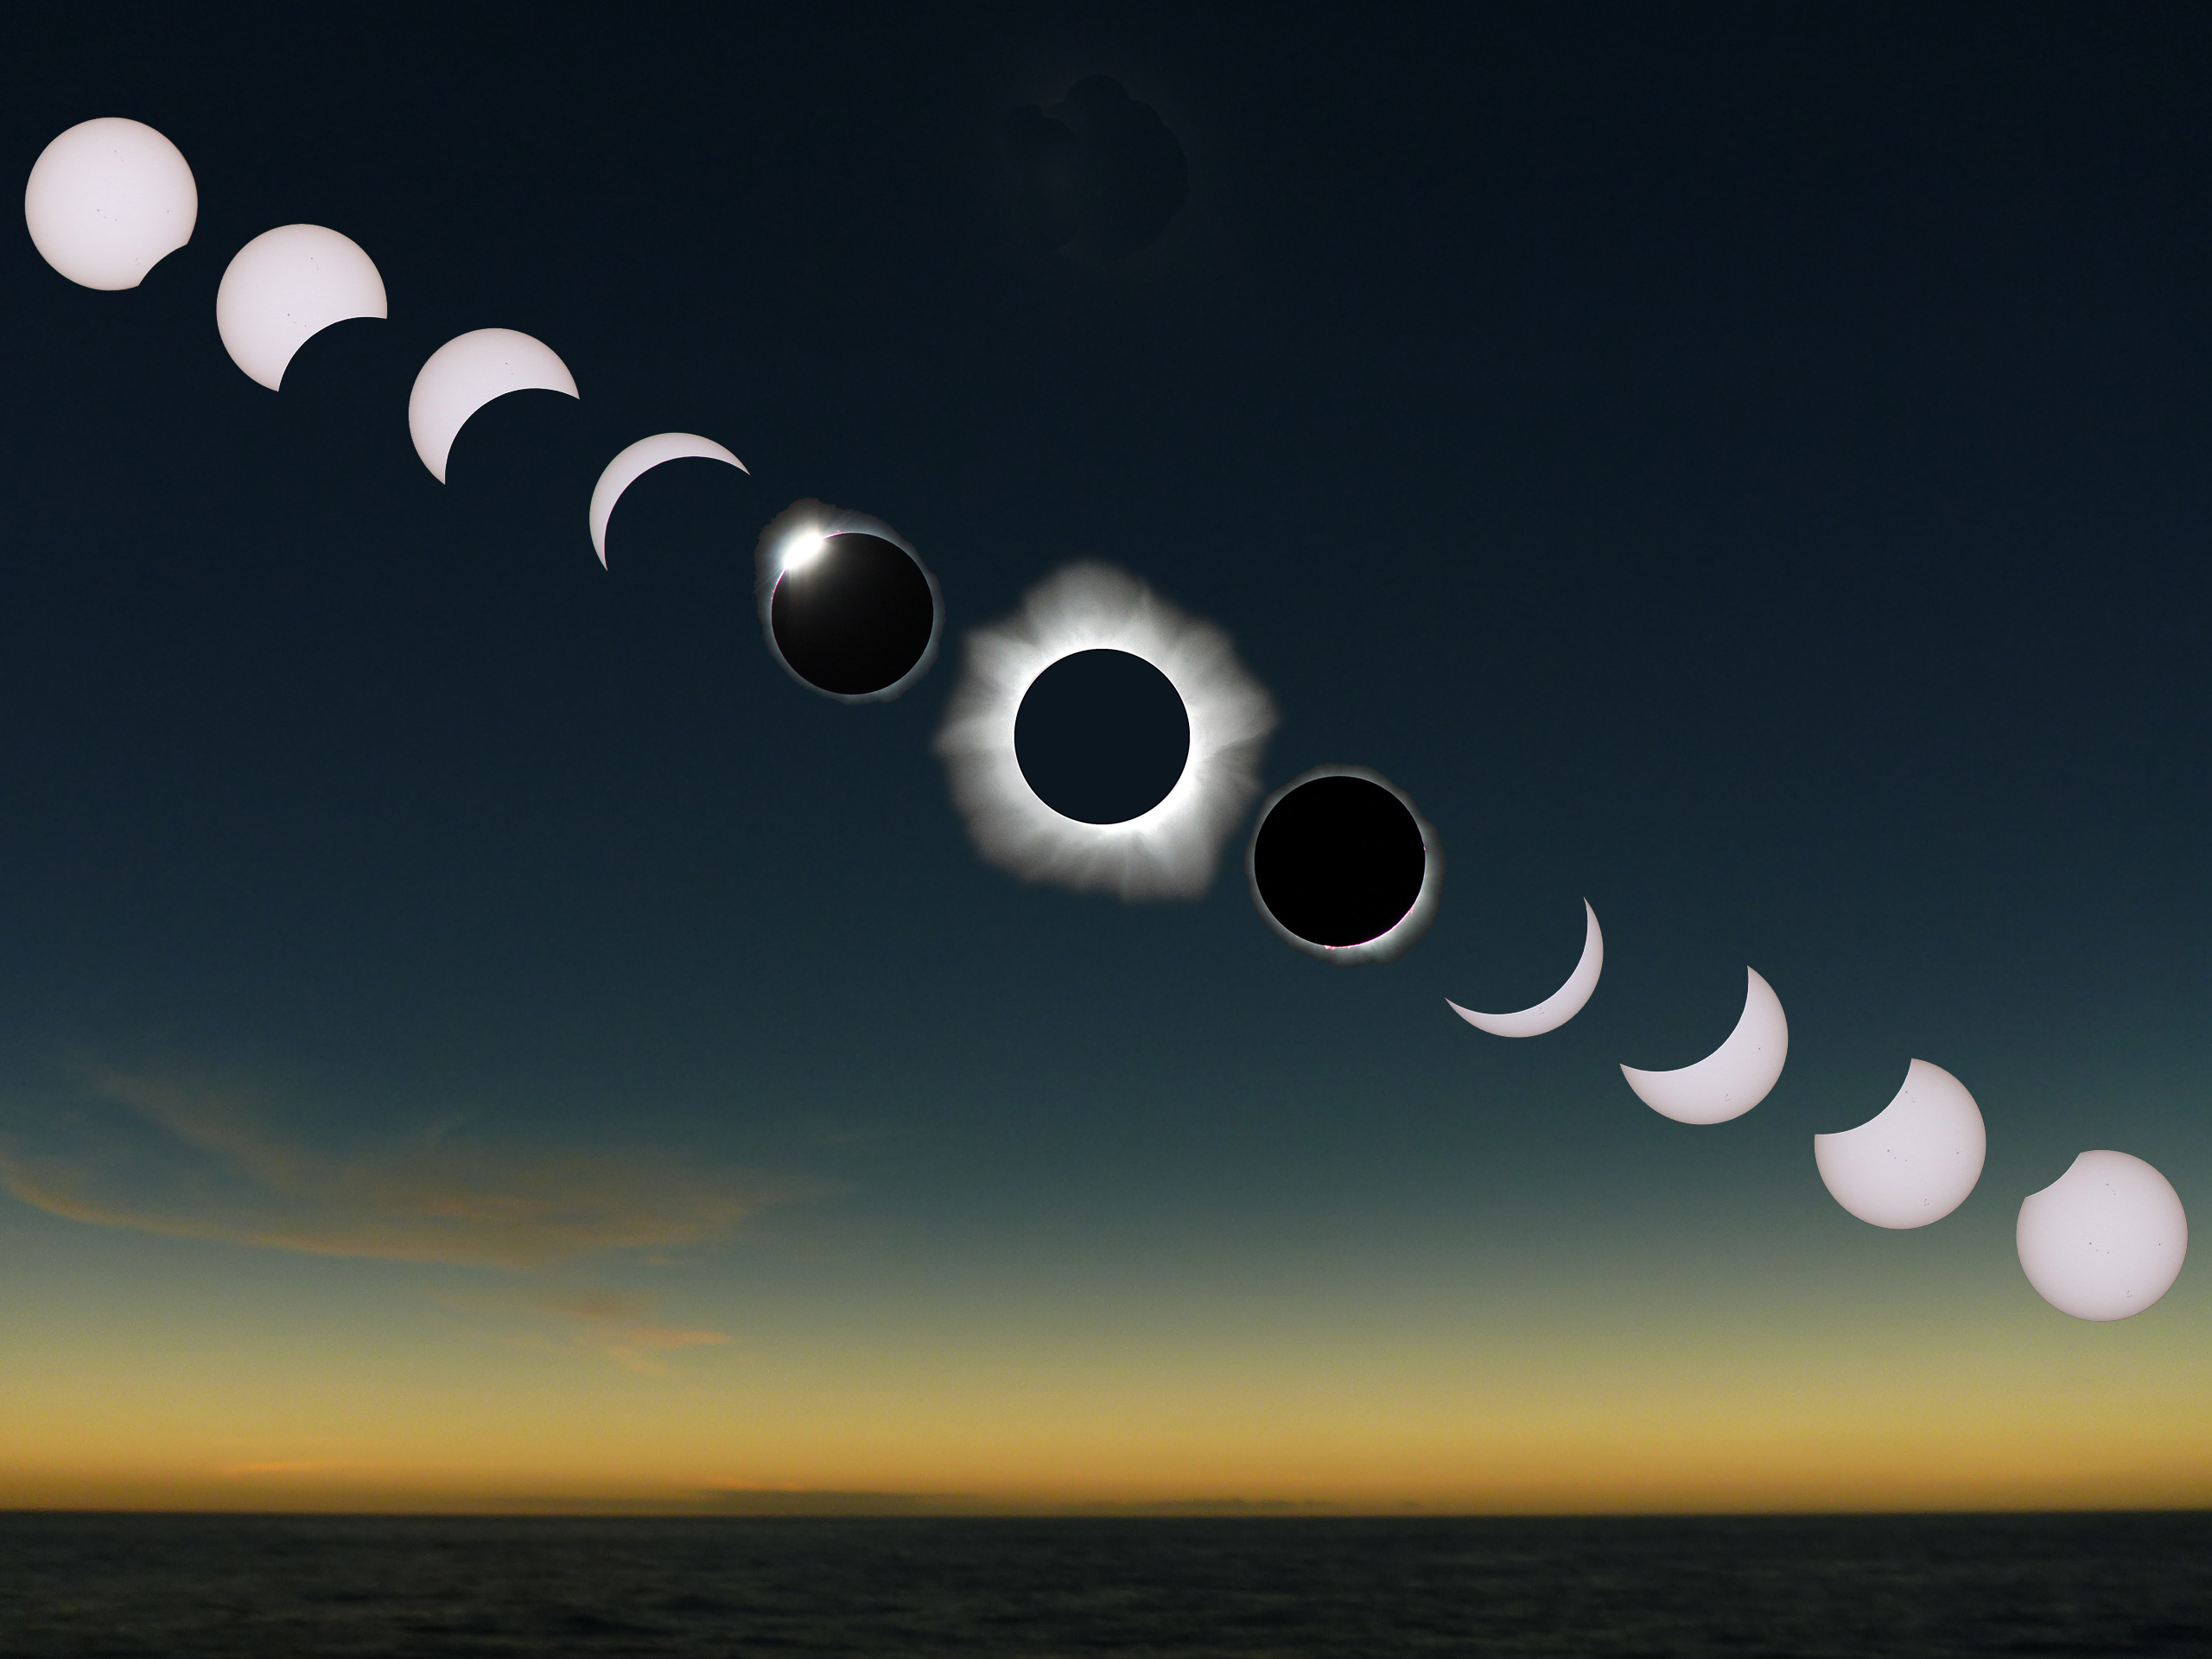 Astronomy 101: Discovering How Often Eclipses Happen